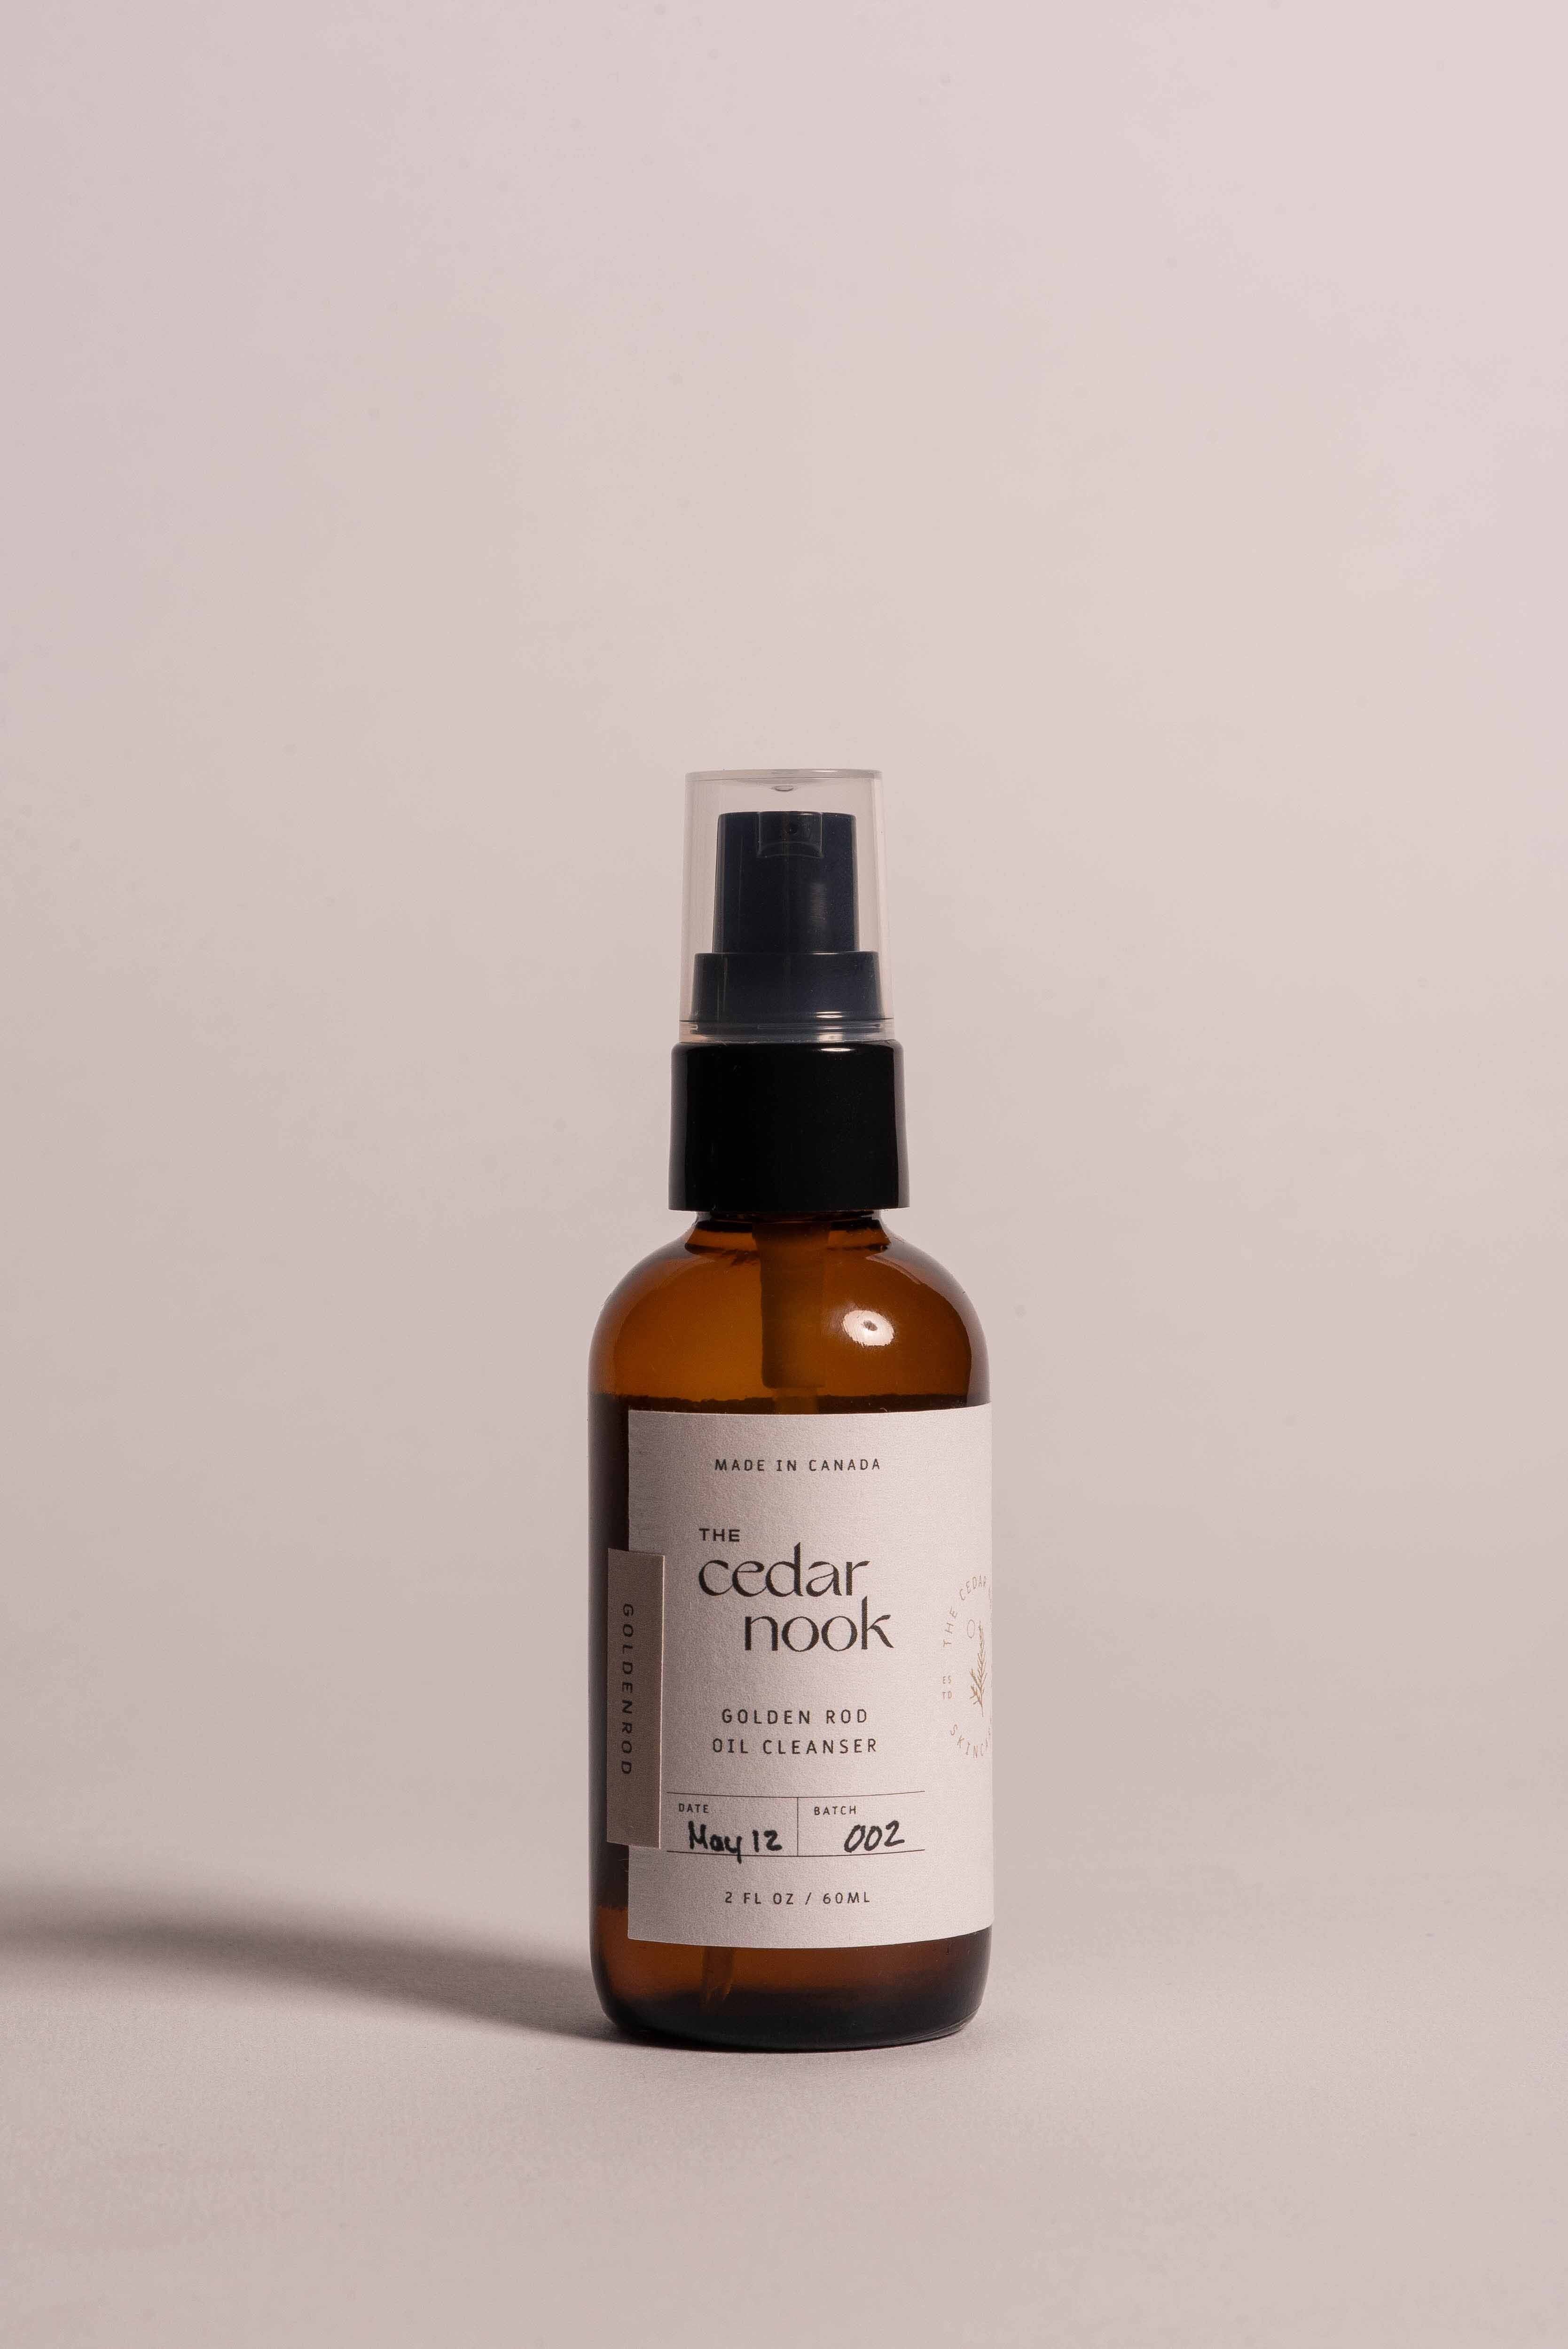 The Cedar Nook Goldenrod Oil Cleanser in 2 oz reusable amber glass bottle with airless pump top showing front label on light pink background